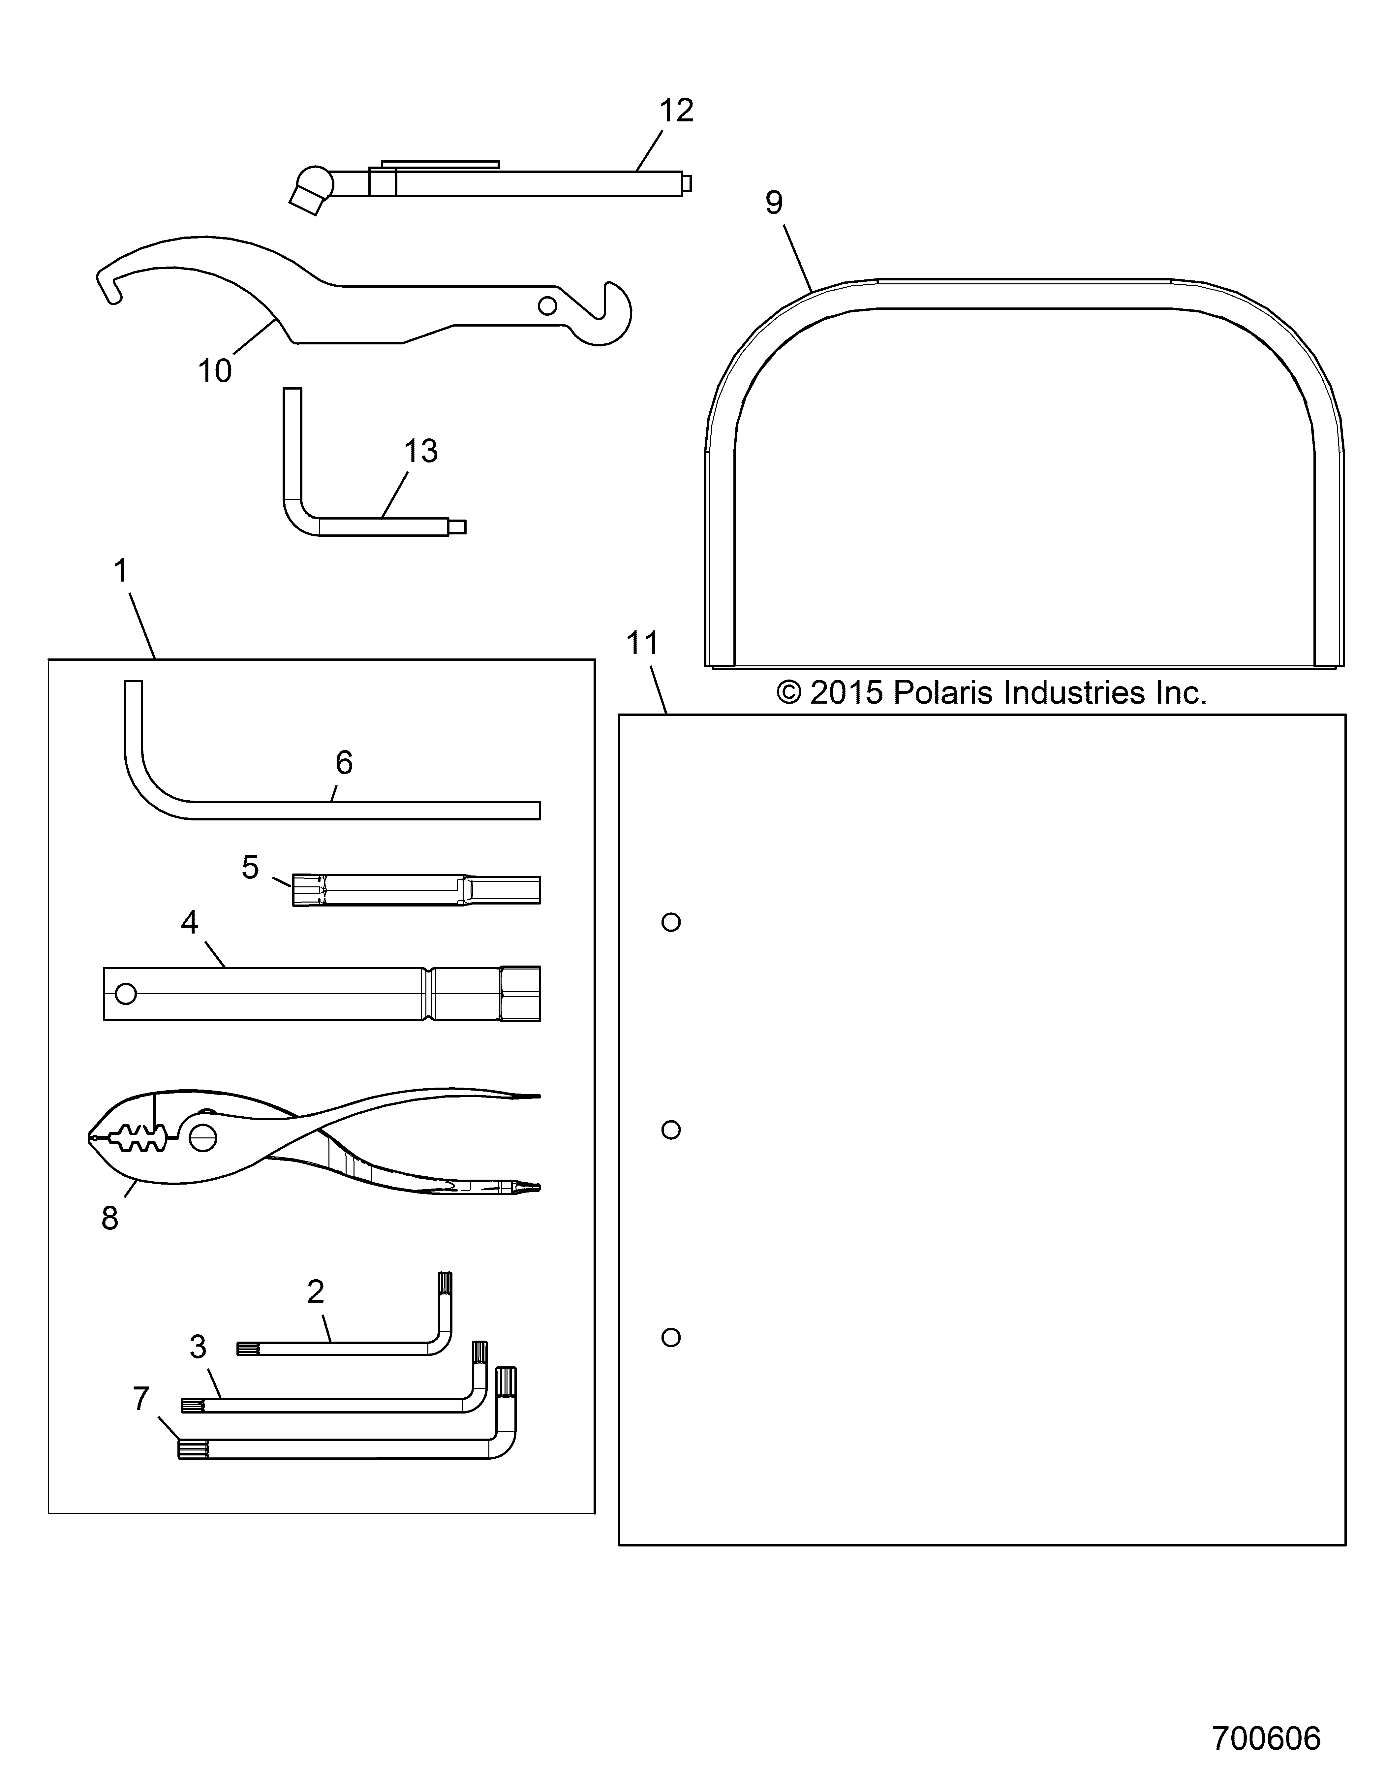 REFERENCE, OWNERS MANUAL AND TOOL KIT - Z19VEL92AK/BK/AR/BR/LR/AM/BM (700606)